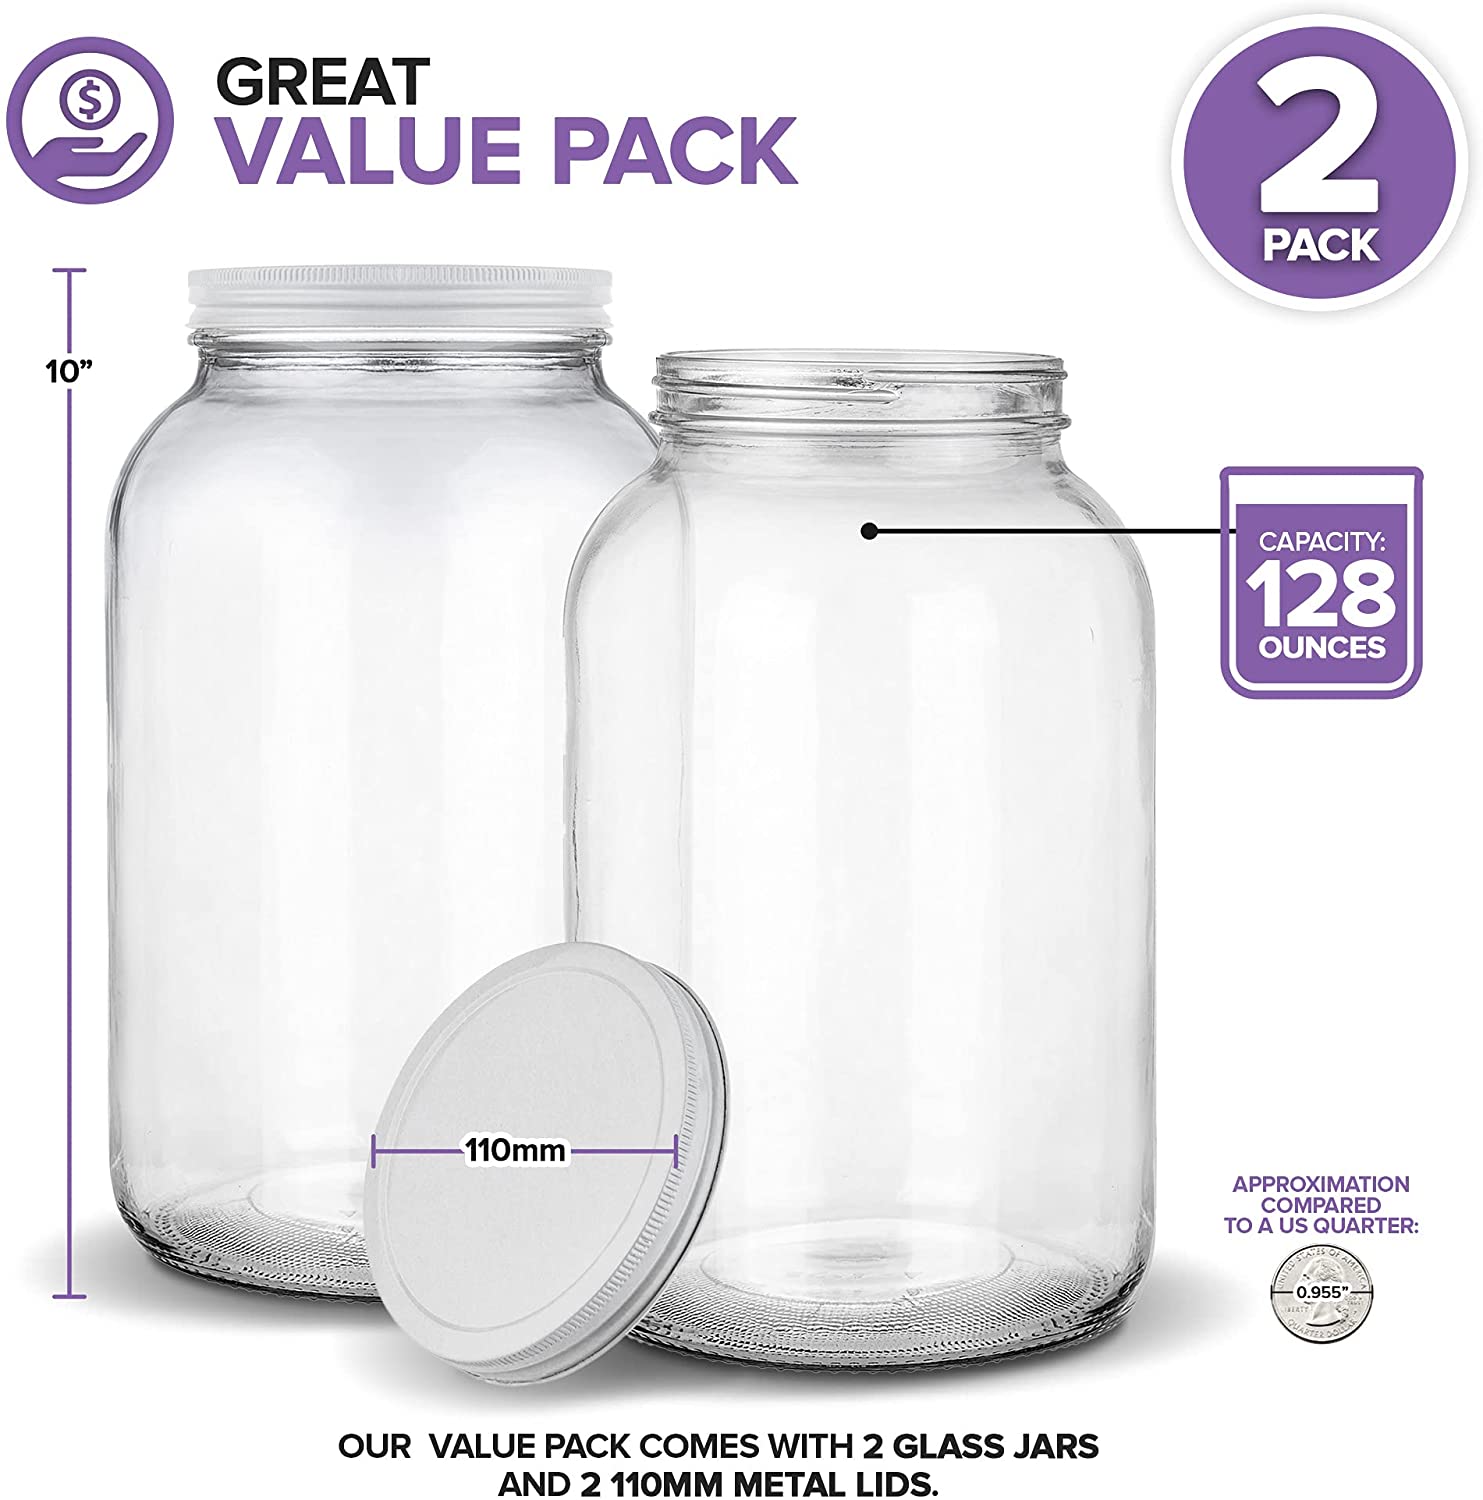 Airtight Glass Canister with Metal Lid